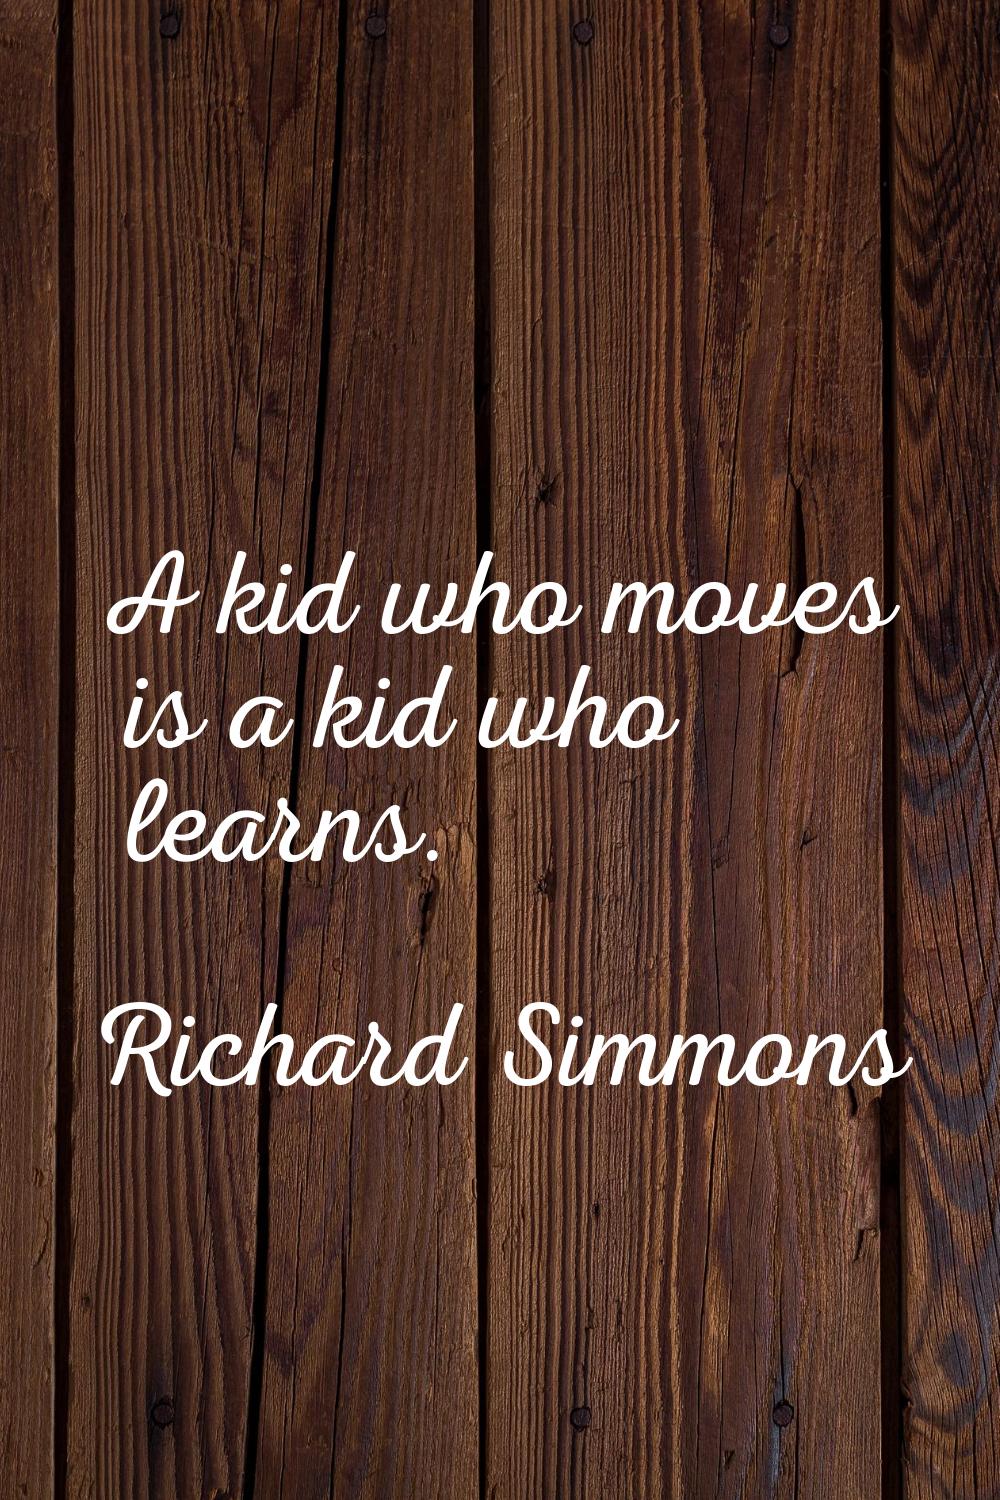 A kid who moves is a kid who learns.